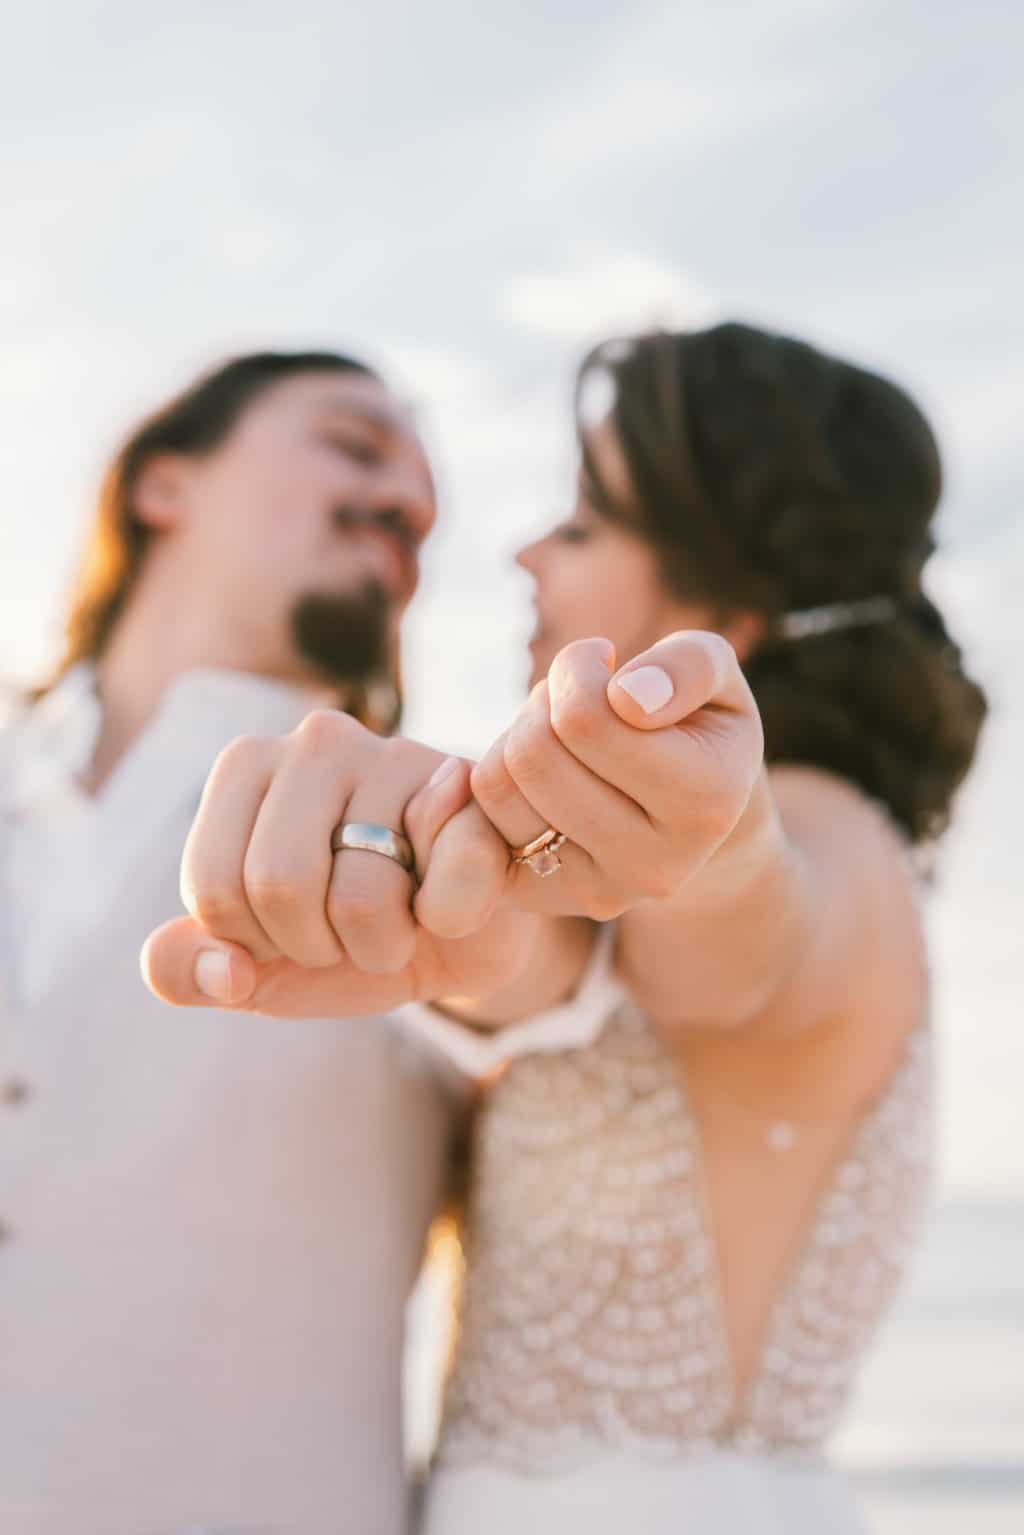 Free Newlywed Couple Showing Their Wedding Rings  Stock Photo